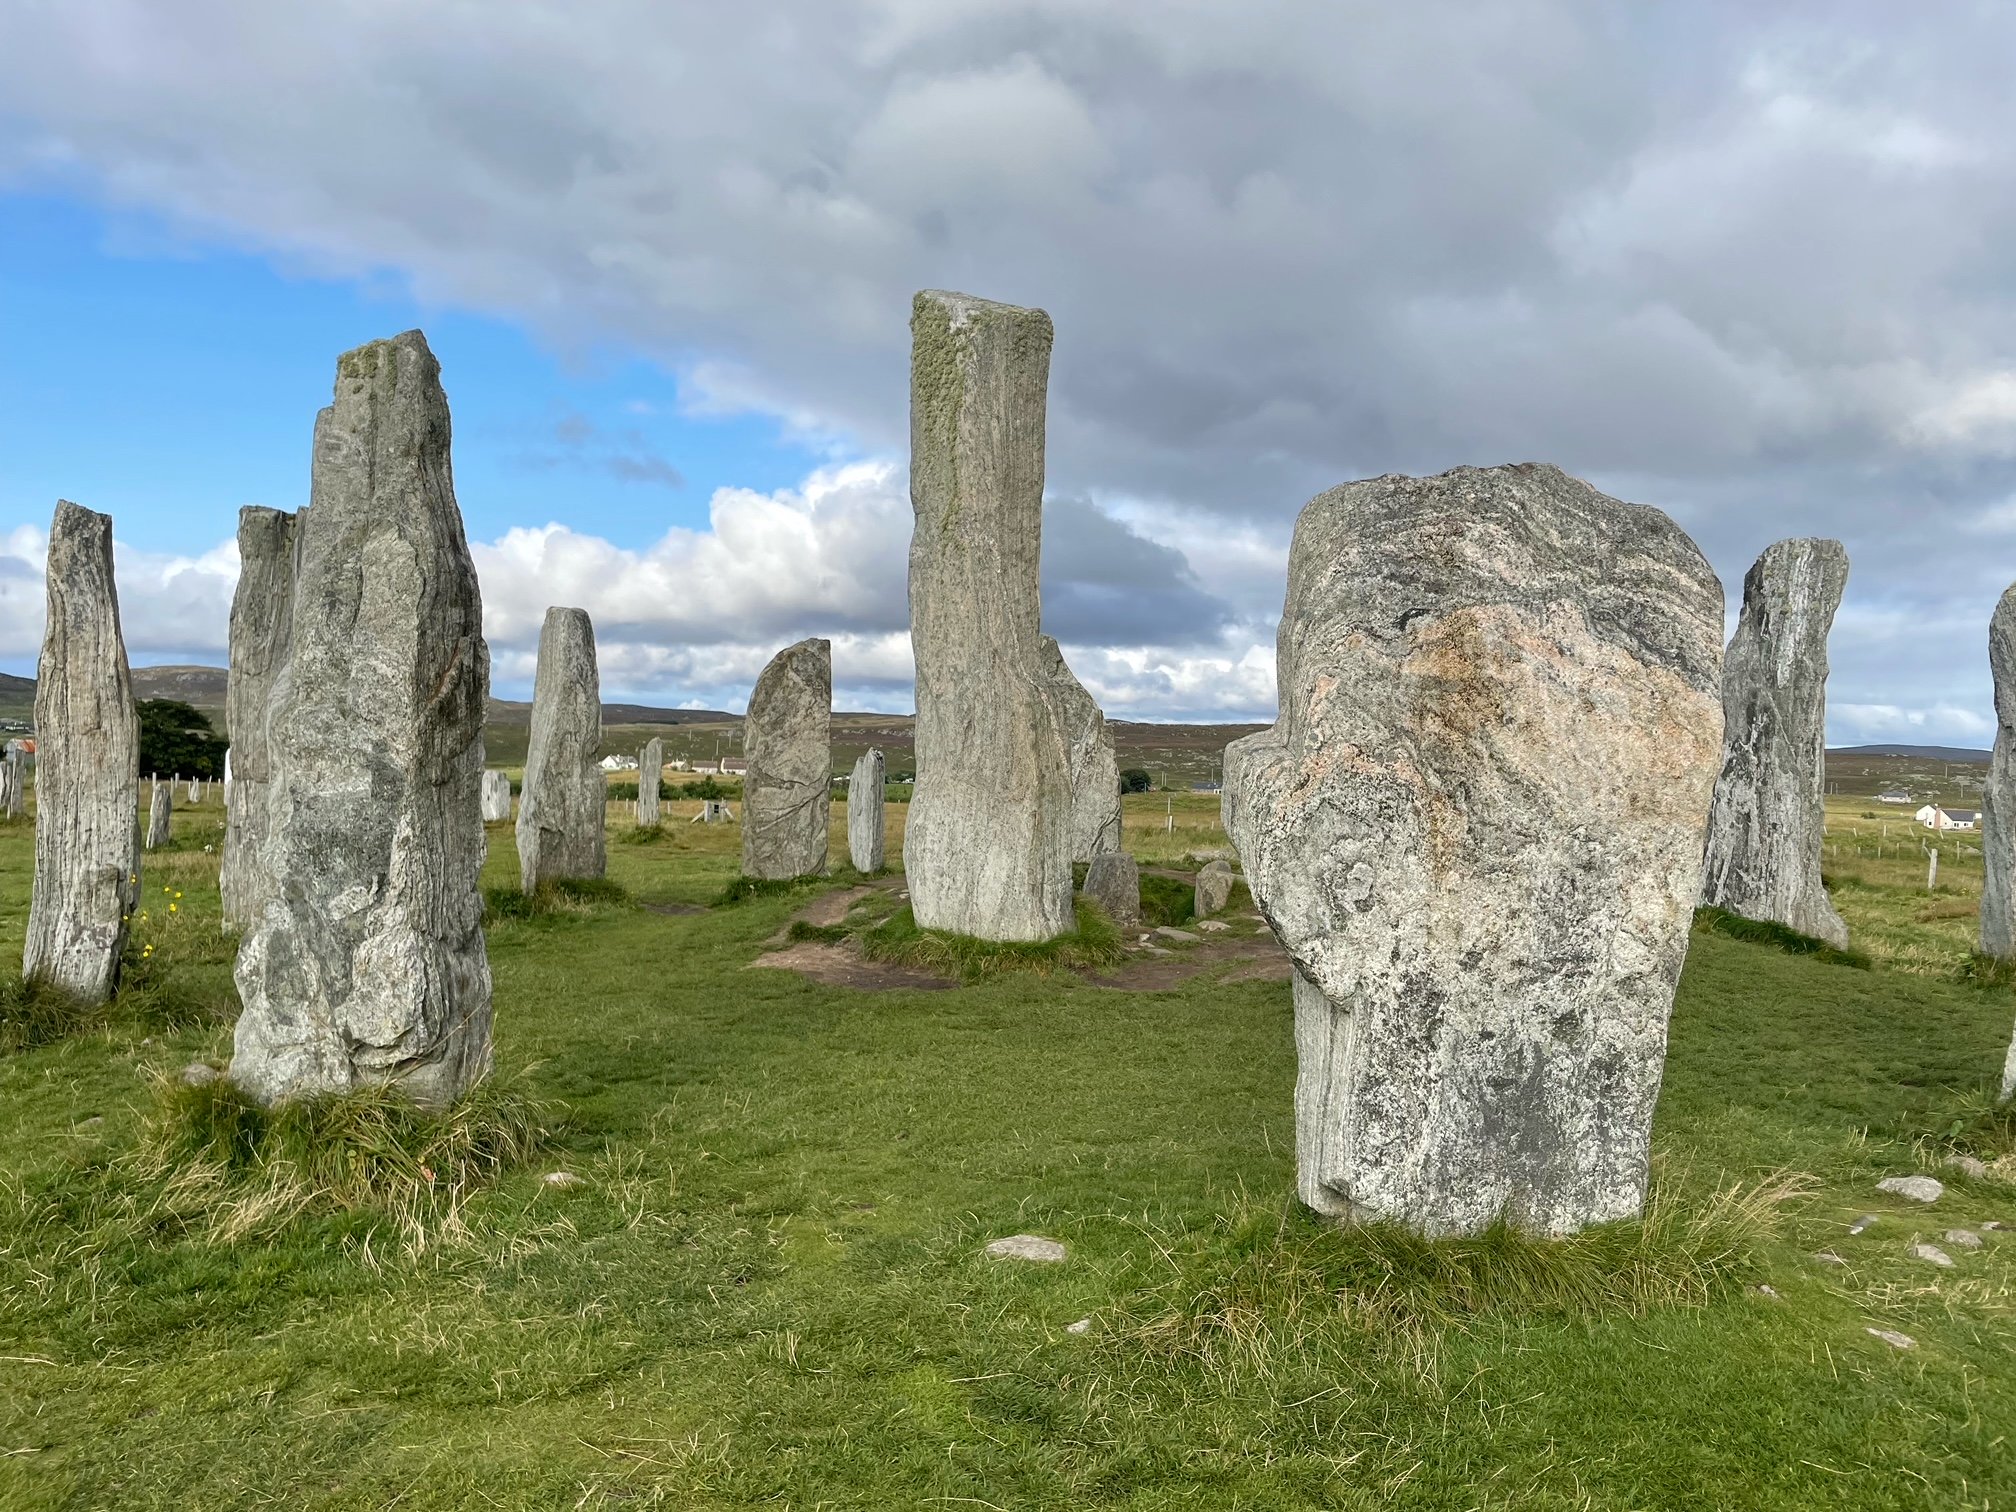 The Isle of Lewis & Harris is home to the ancient Callanish Standing Stones and stunning Caribbean looking beaches.